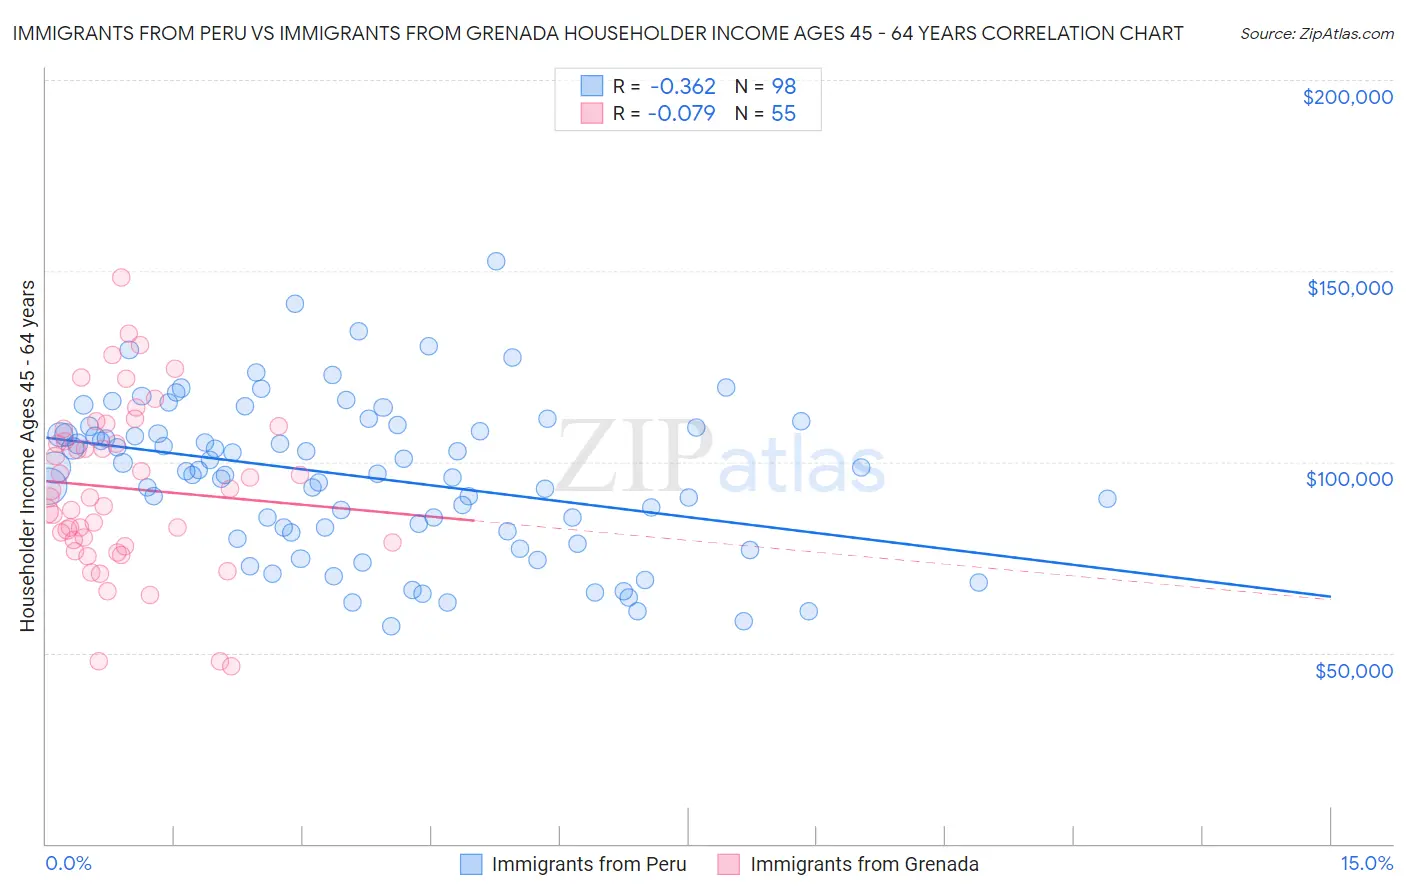 Immigrants from Peru vs Immigrants from Grenada Householder Income Ages 45 - 64 years